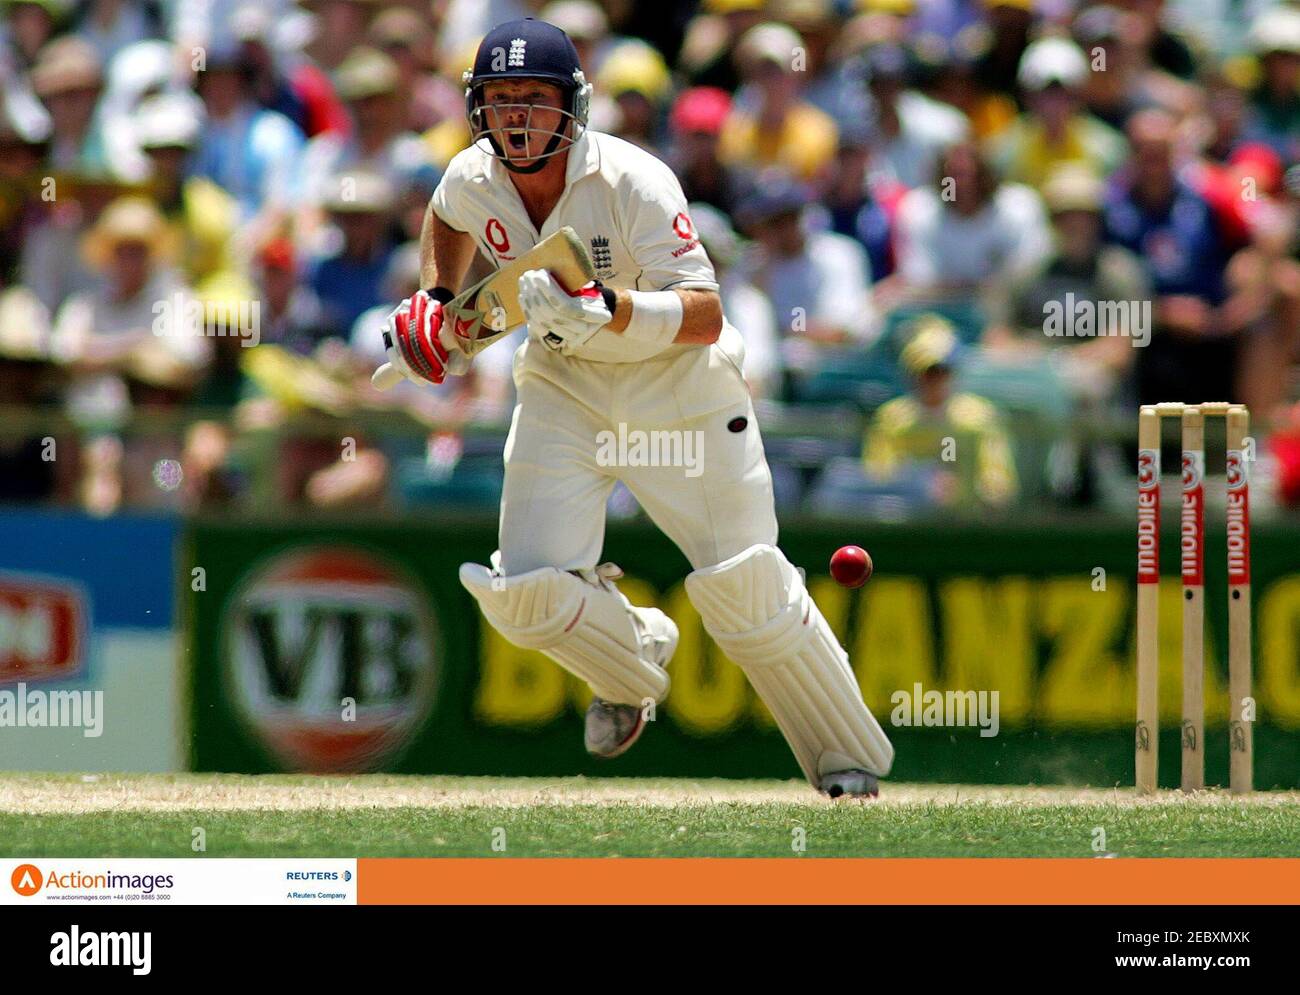 Cricket - Australia v England Third Test - 3 Mobile Ashes Test Series 2006-07  - WACA Perth Ground, Perth, Australia - 17/12/06  England's Ian Bell takes a single  Mandatory Credit: Action Images / Jason O'Brien  Livepic Stock Photo